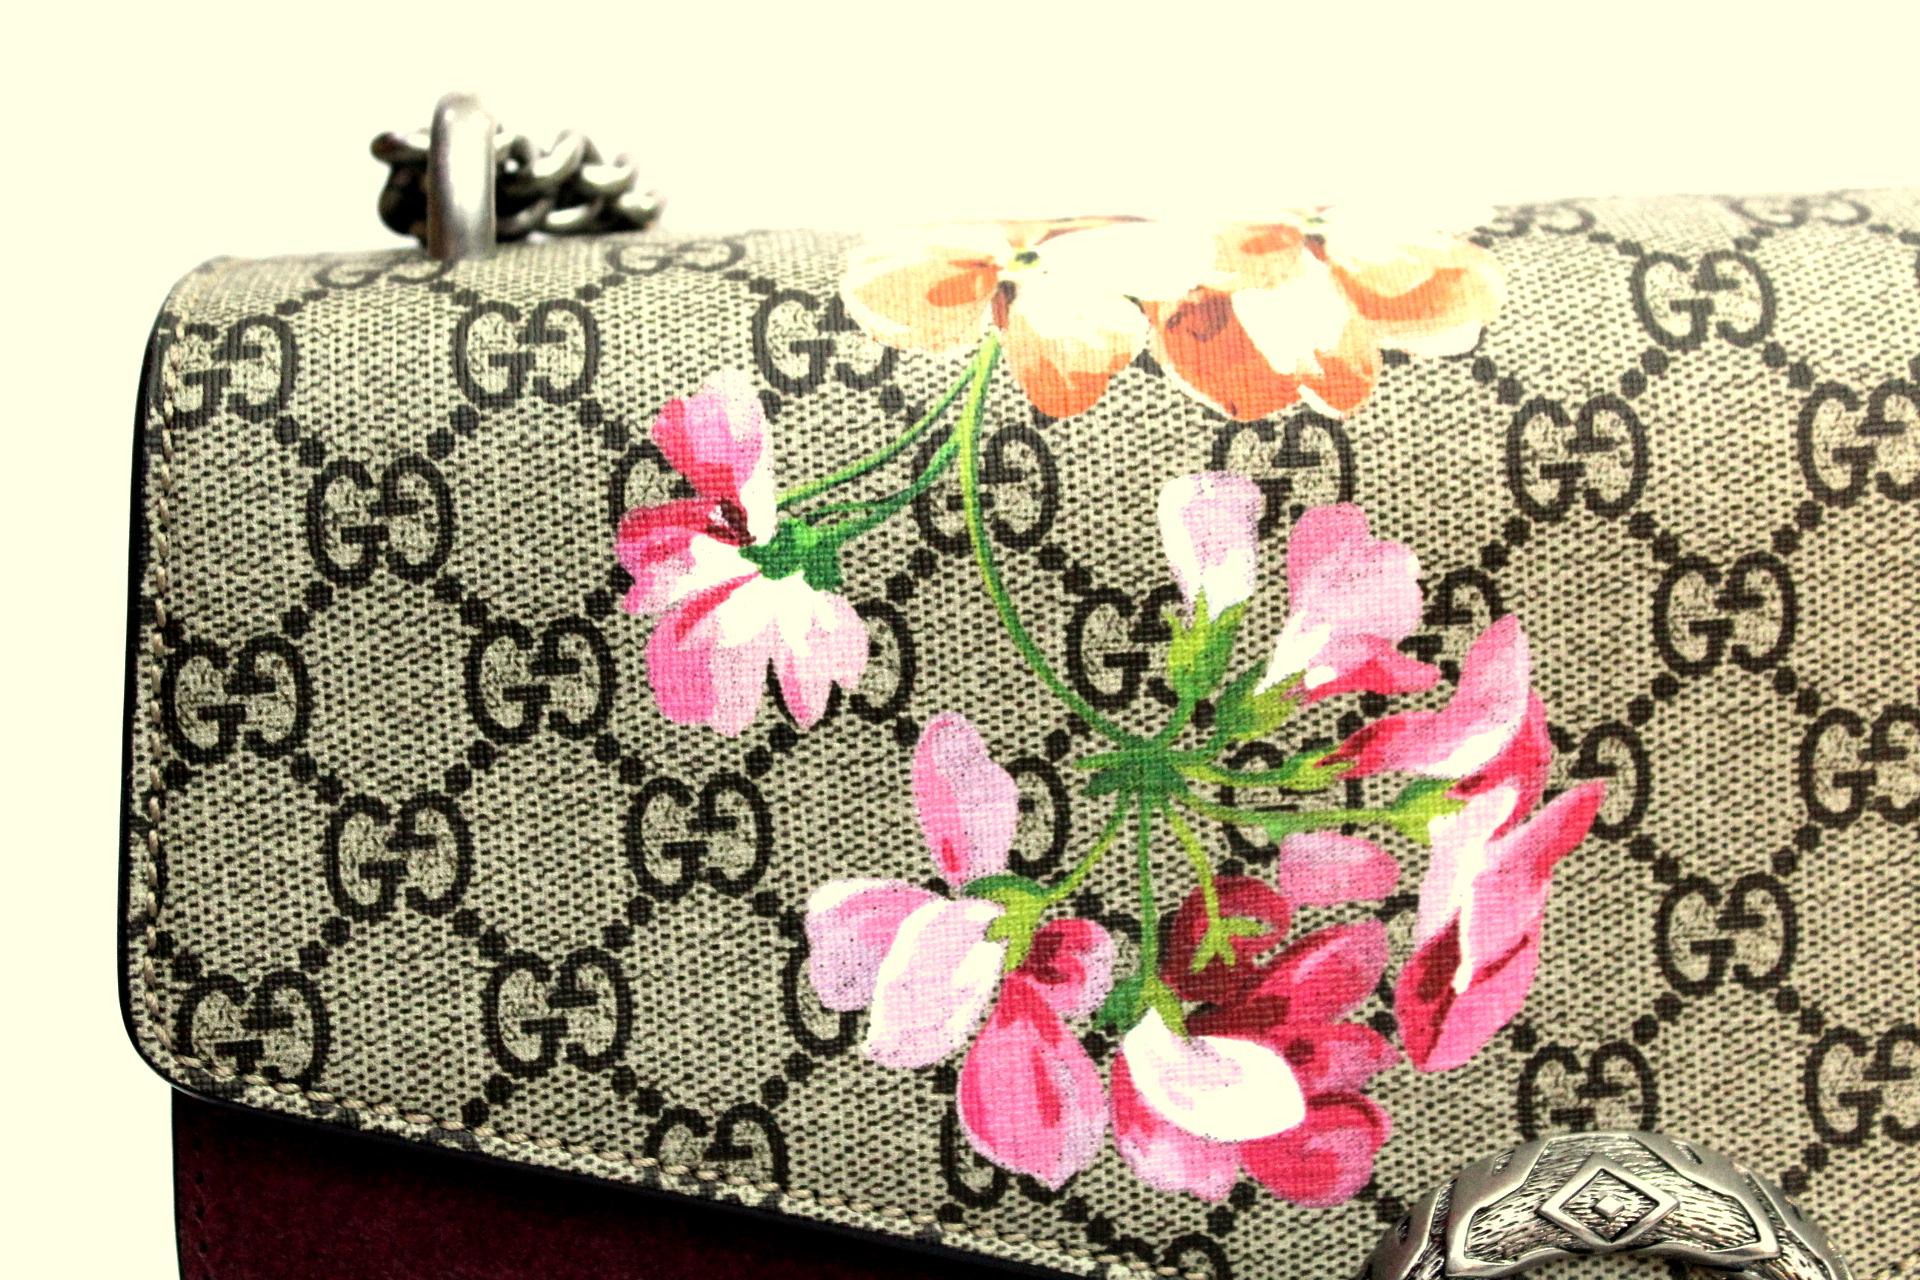 Gucci bag model Dionysus, made of GG Supreme fabric, with Blooms print and antique pink suede detail. Antique silver-colored finishes. Thanks to the sliding chain shoulder strap to be worn in several ways, it can be worn as a shoulder bag or